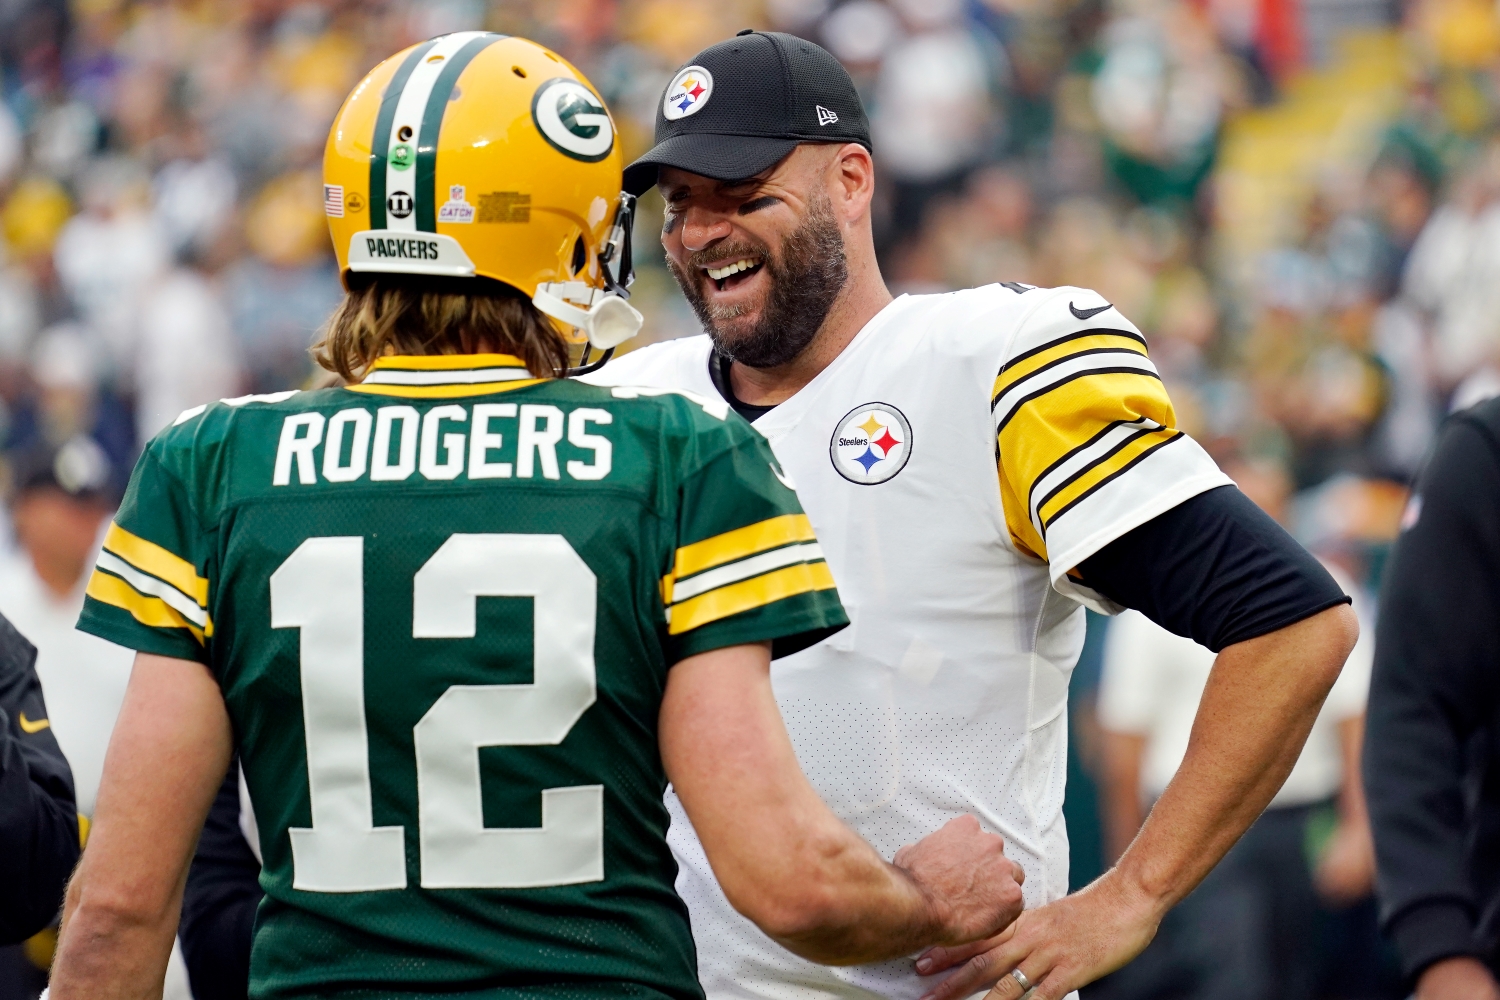 Green Bay Packers quarterback Aaron Rodgers speaks to Pittsburgh Steelers quarterback Ben Roethlisberger before a game.